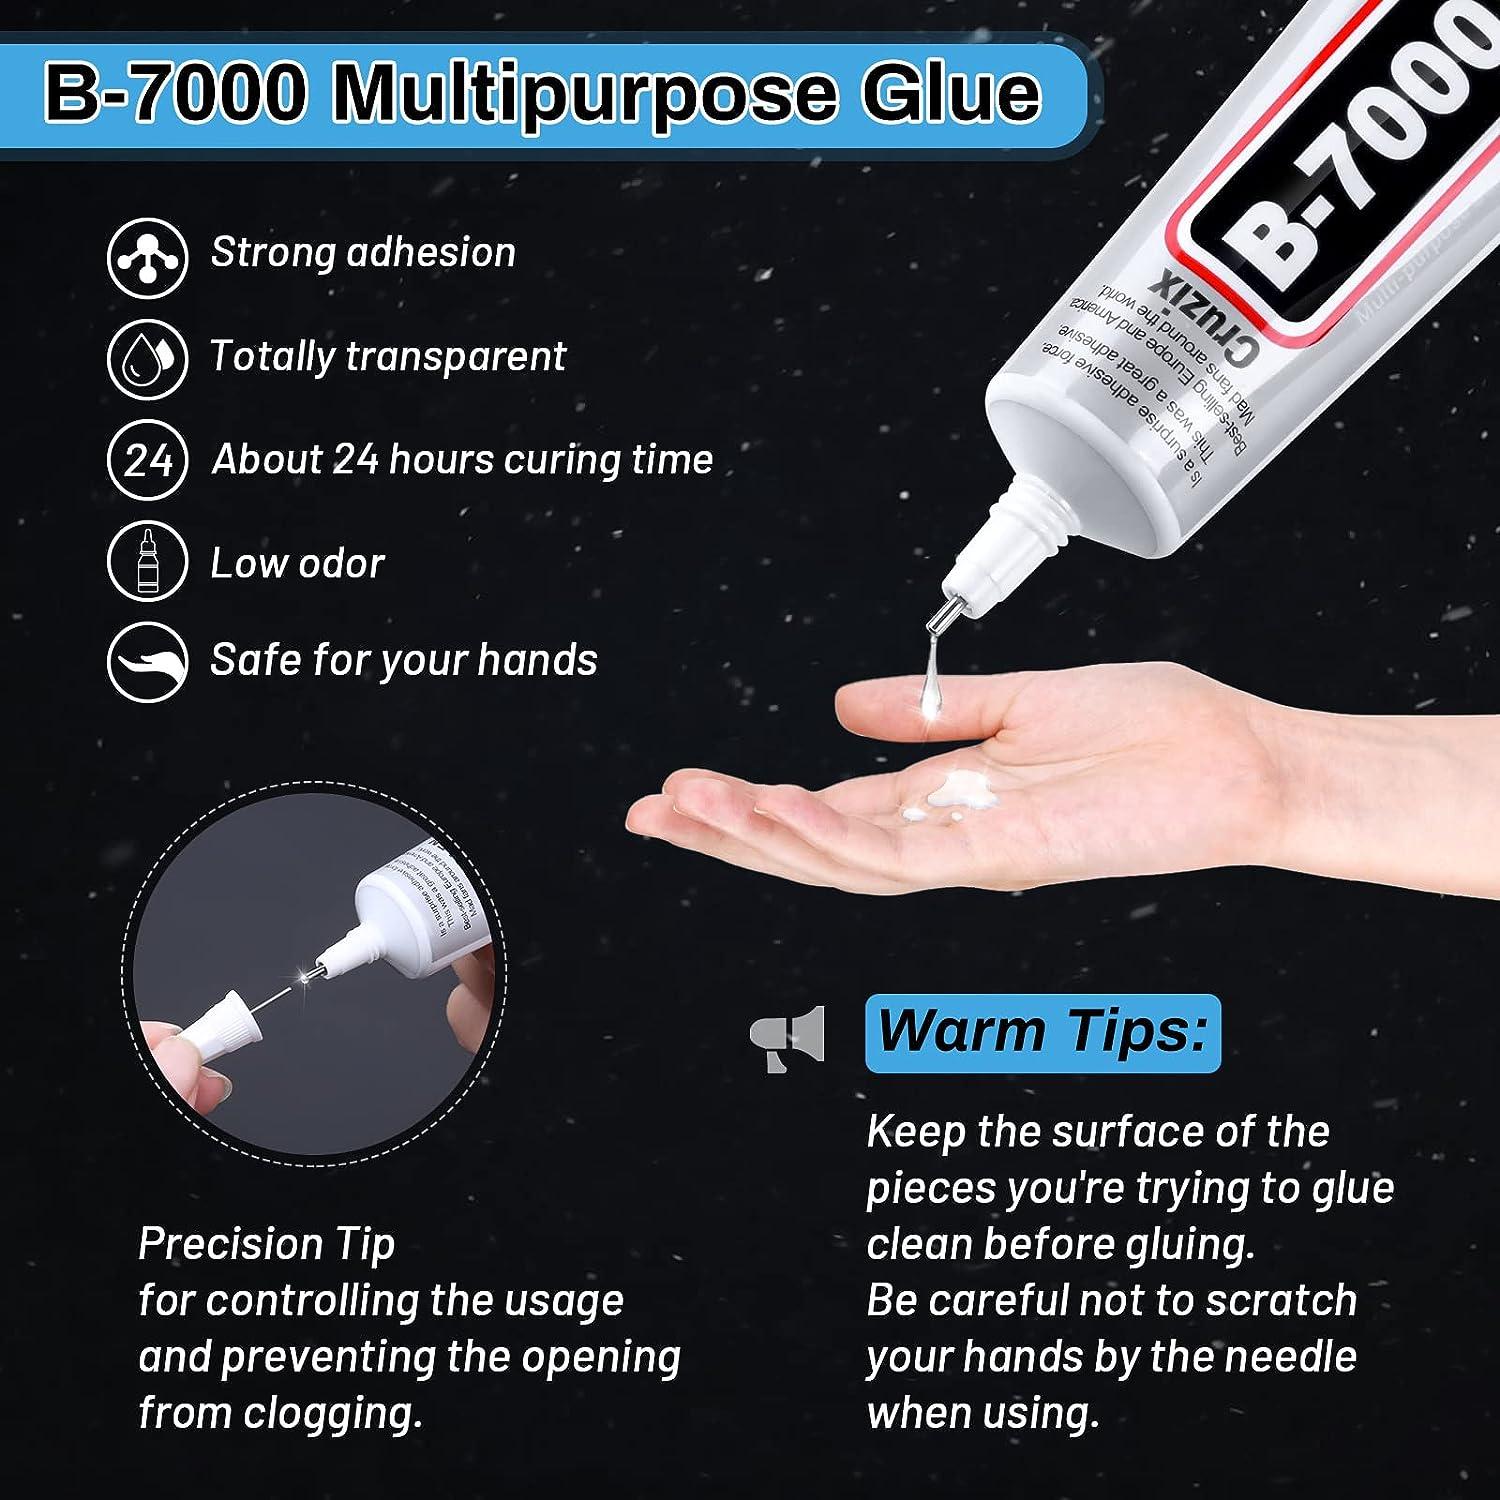  B-7000 Glue for Rhinestones Crafts, 4000Pcs Upgrade Crystal  Clear Flatback Rhinestones with 3Pcs Adhesive Glue Dotting Pen Wax Pencil  Tray Tool for Nail Art Tumbler DIY Jewelry Beads Shoes Clothes 